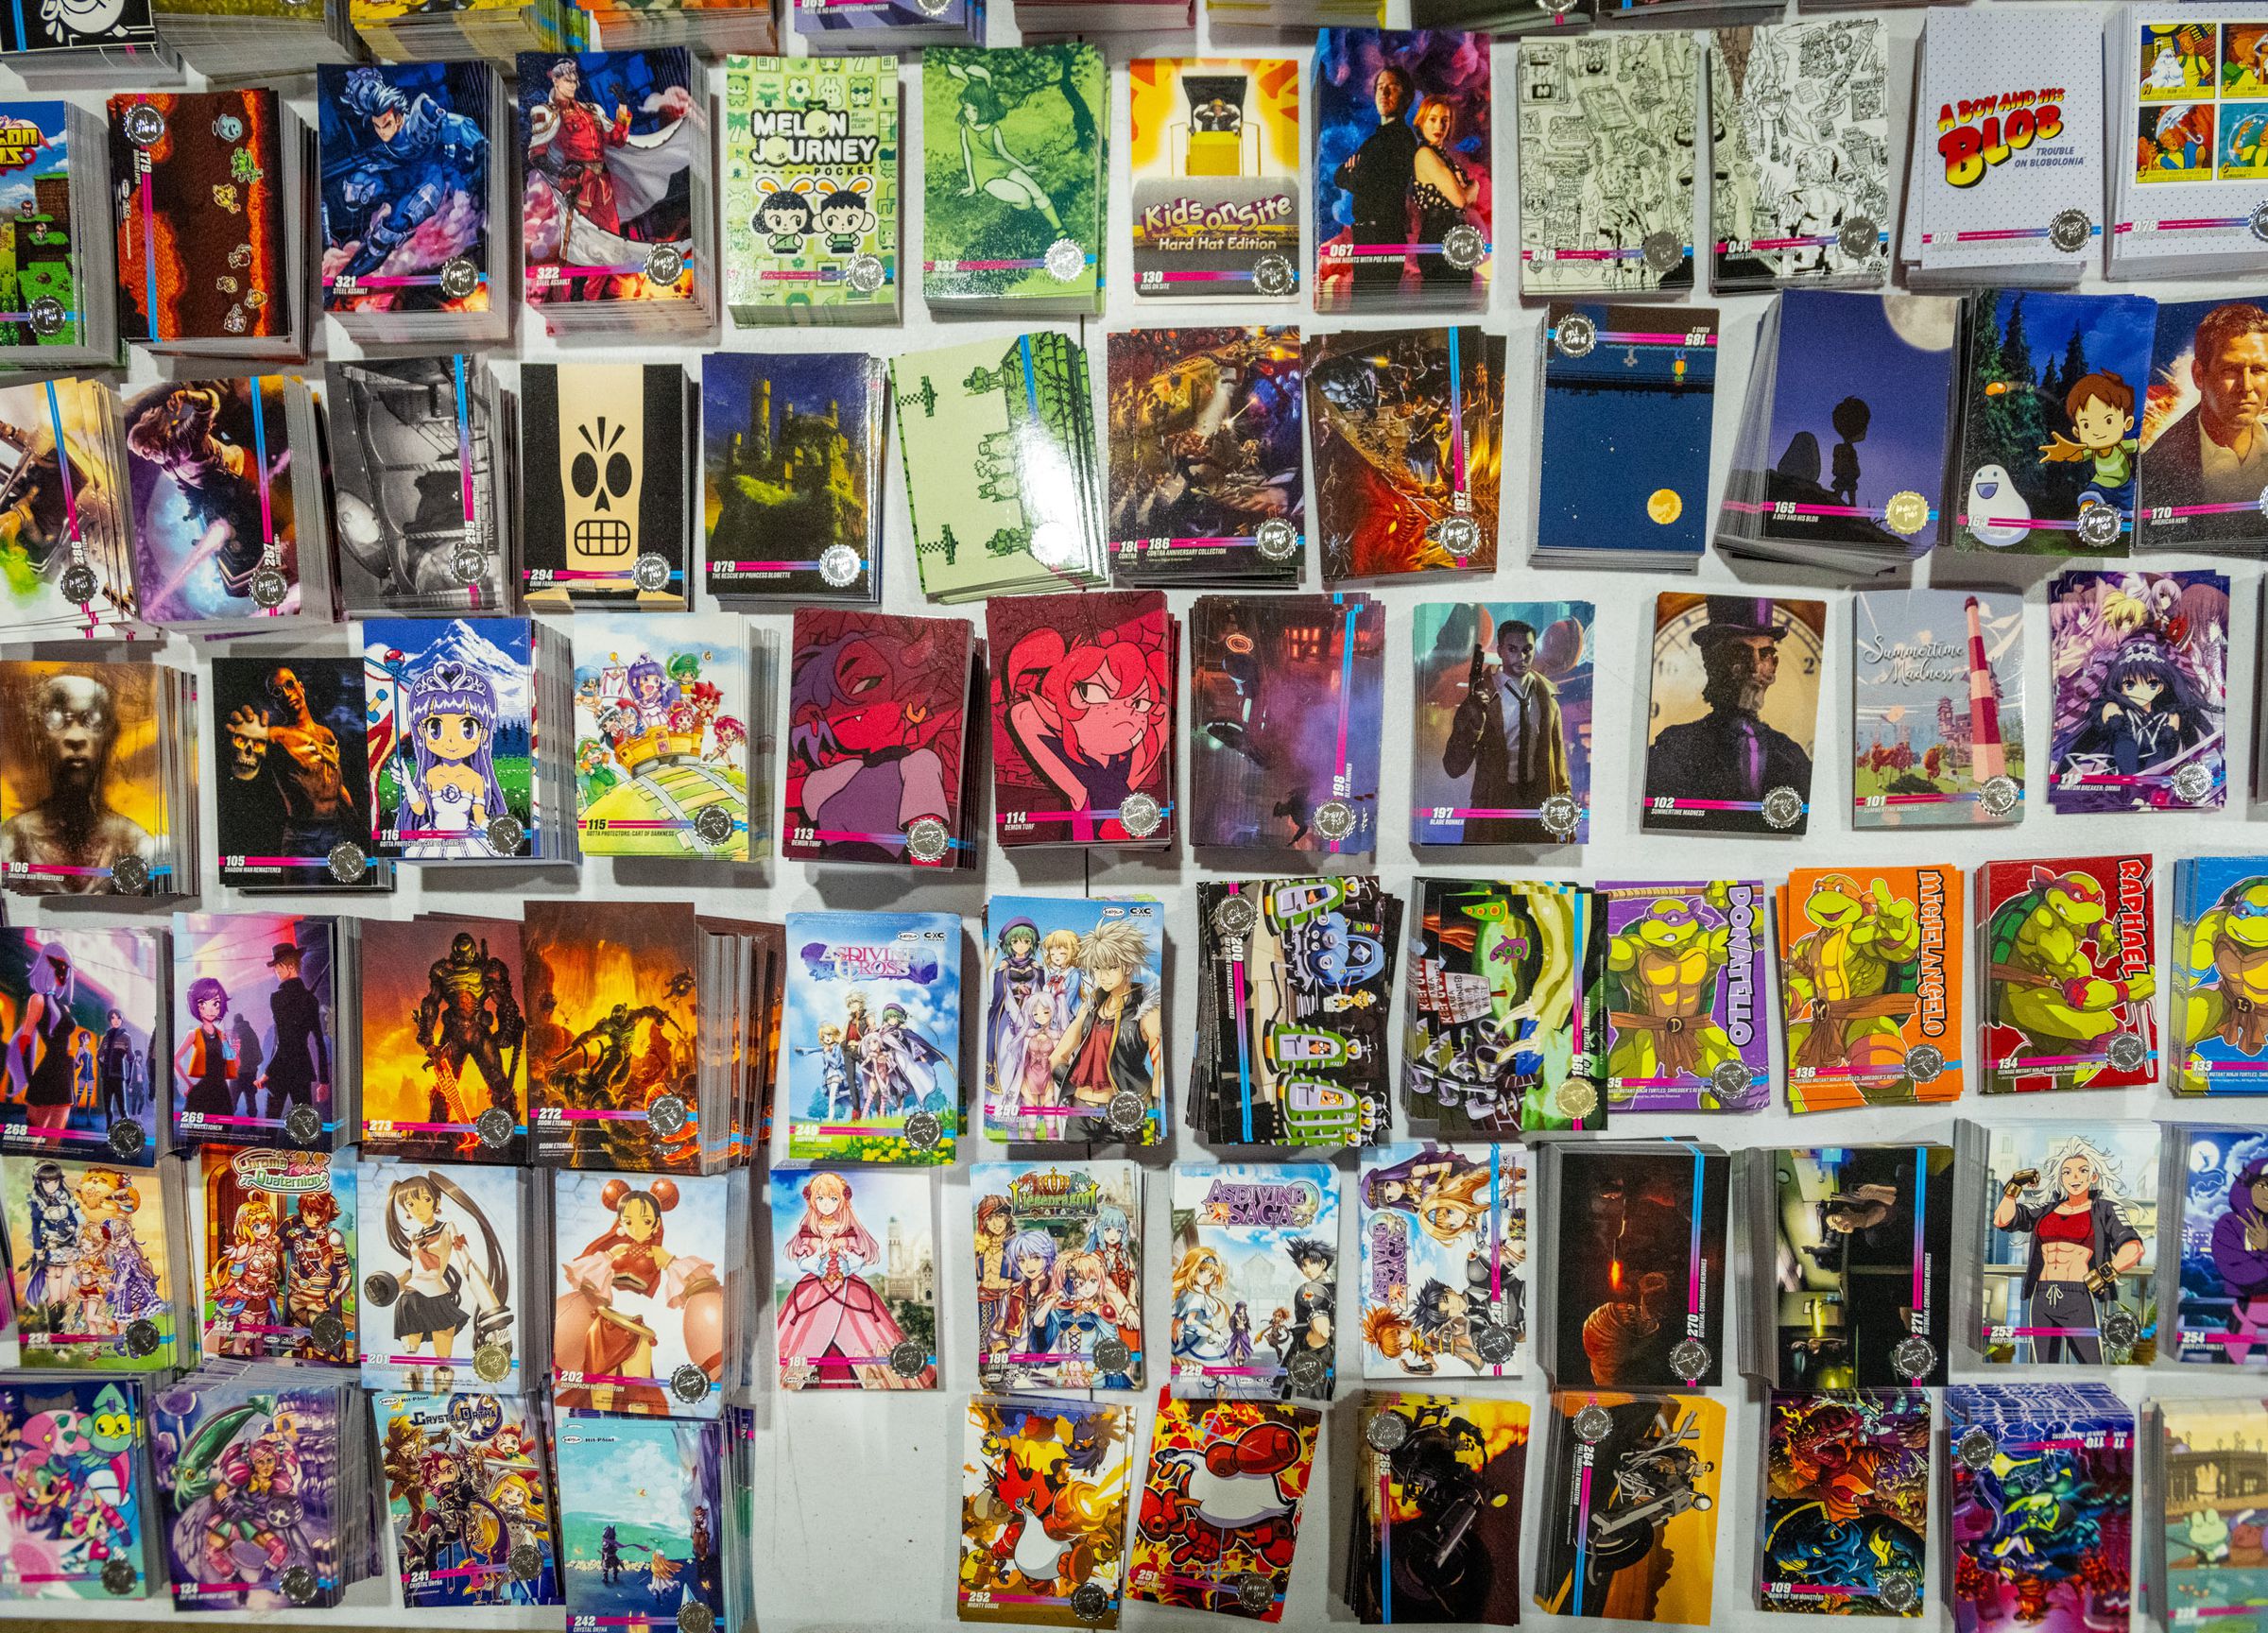 Dozens of different colorful trading cards stacked neatly on a surface for browsing.